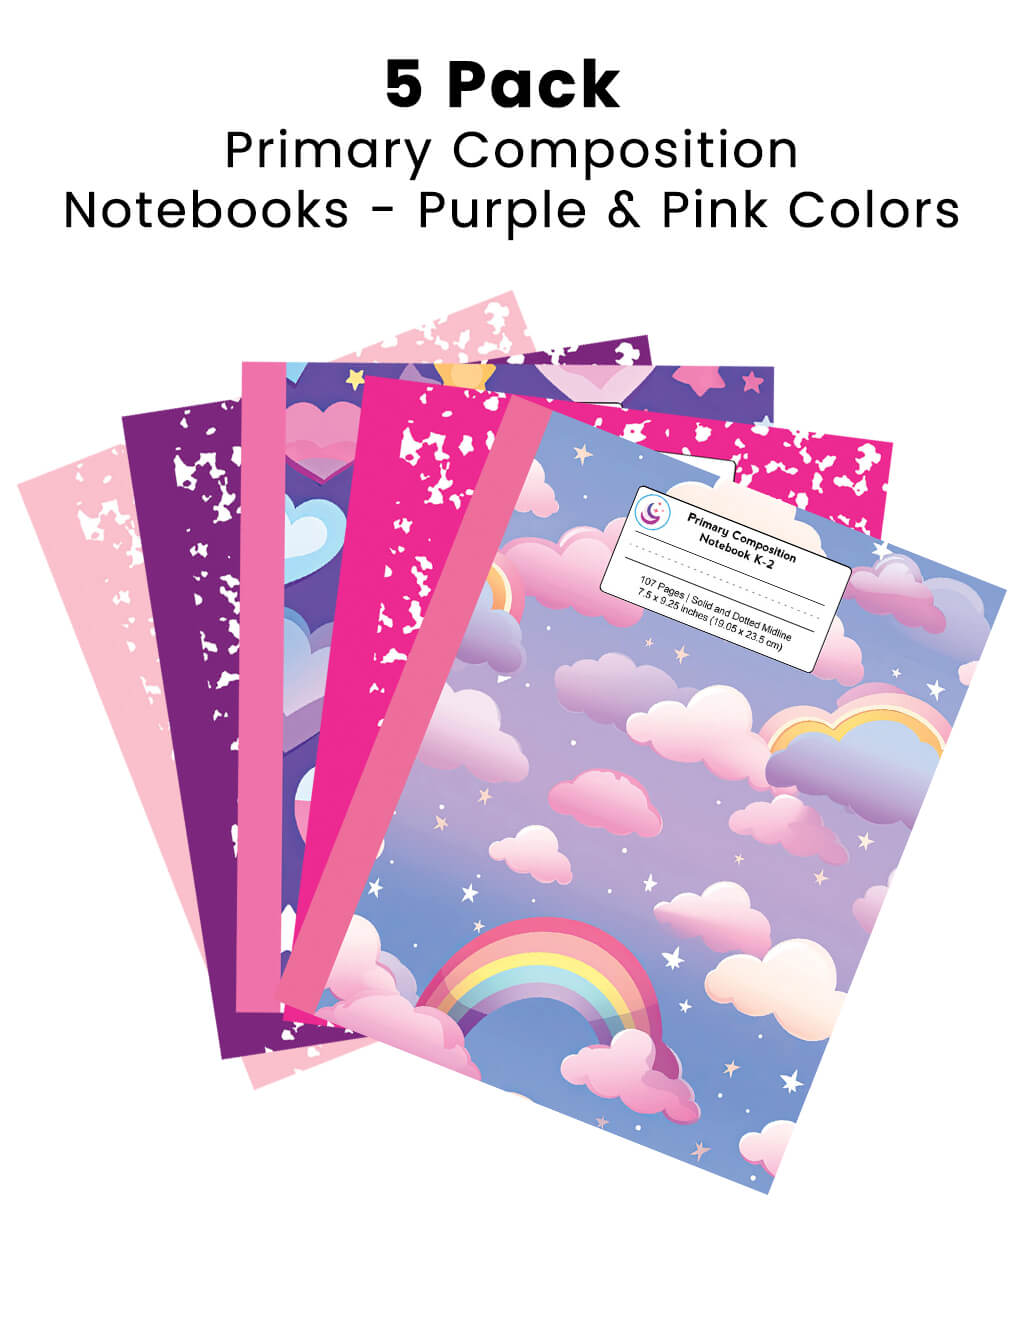 5 Pack of Primary Composition Notebooks: Purple & Pink Colors